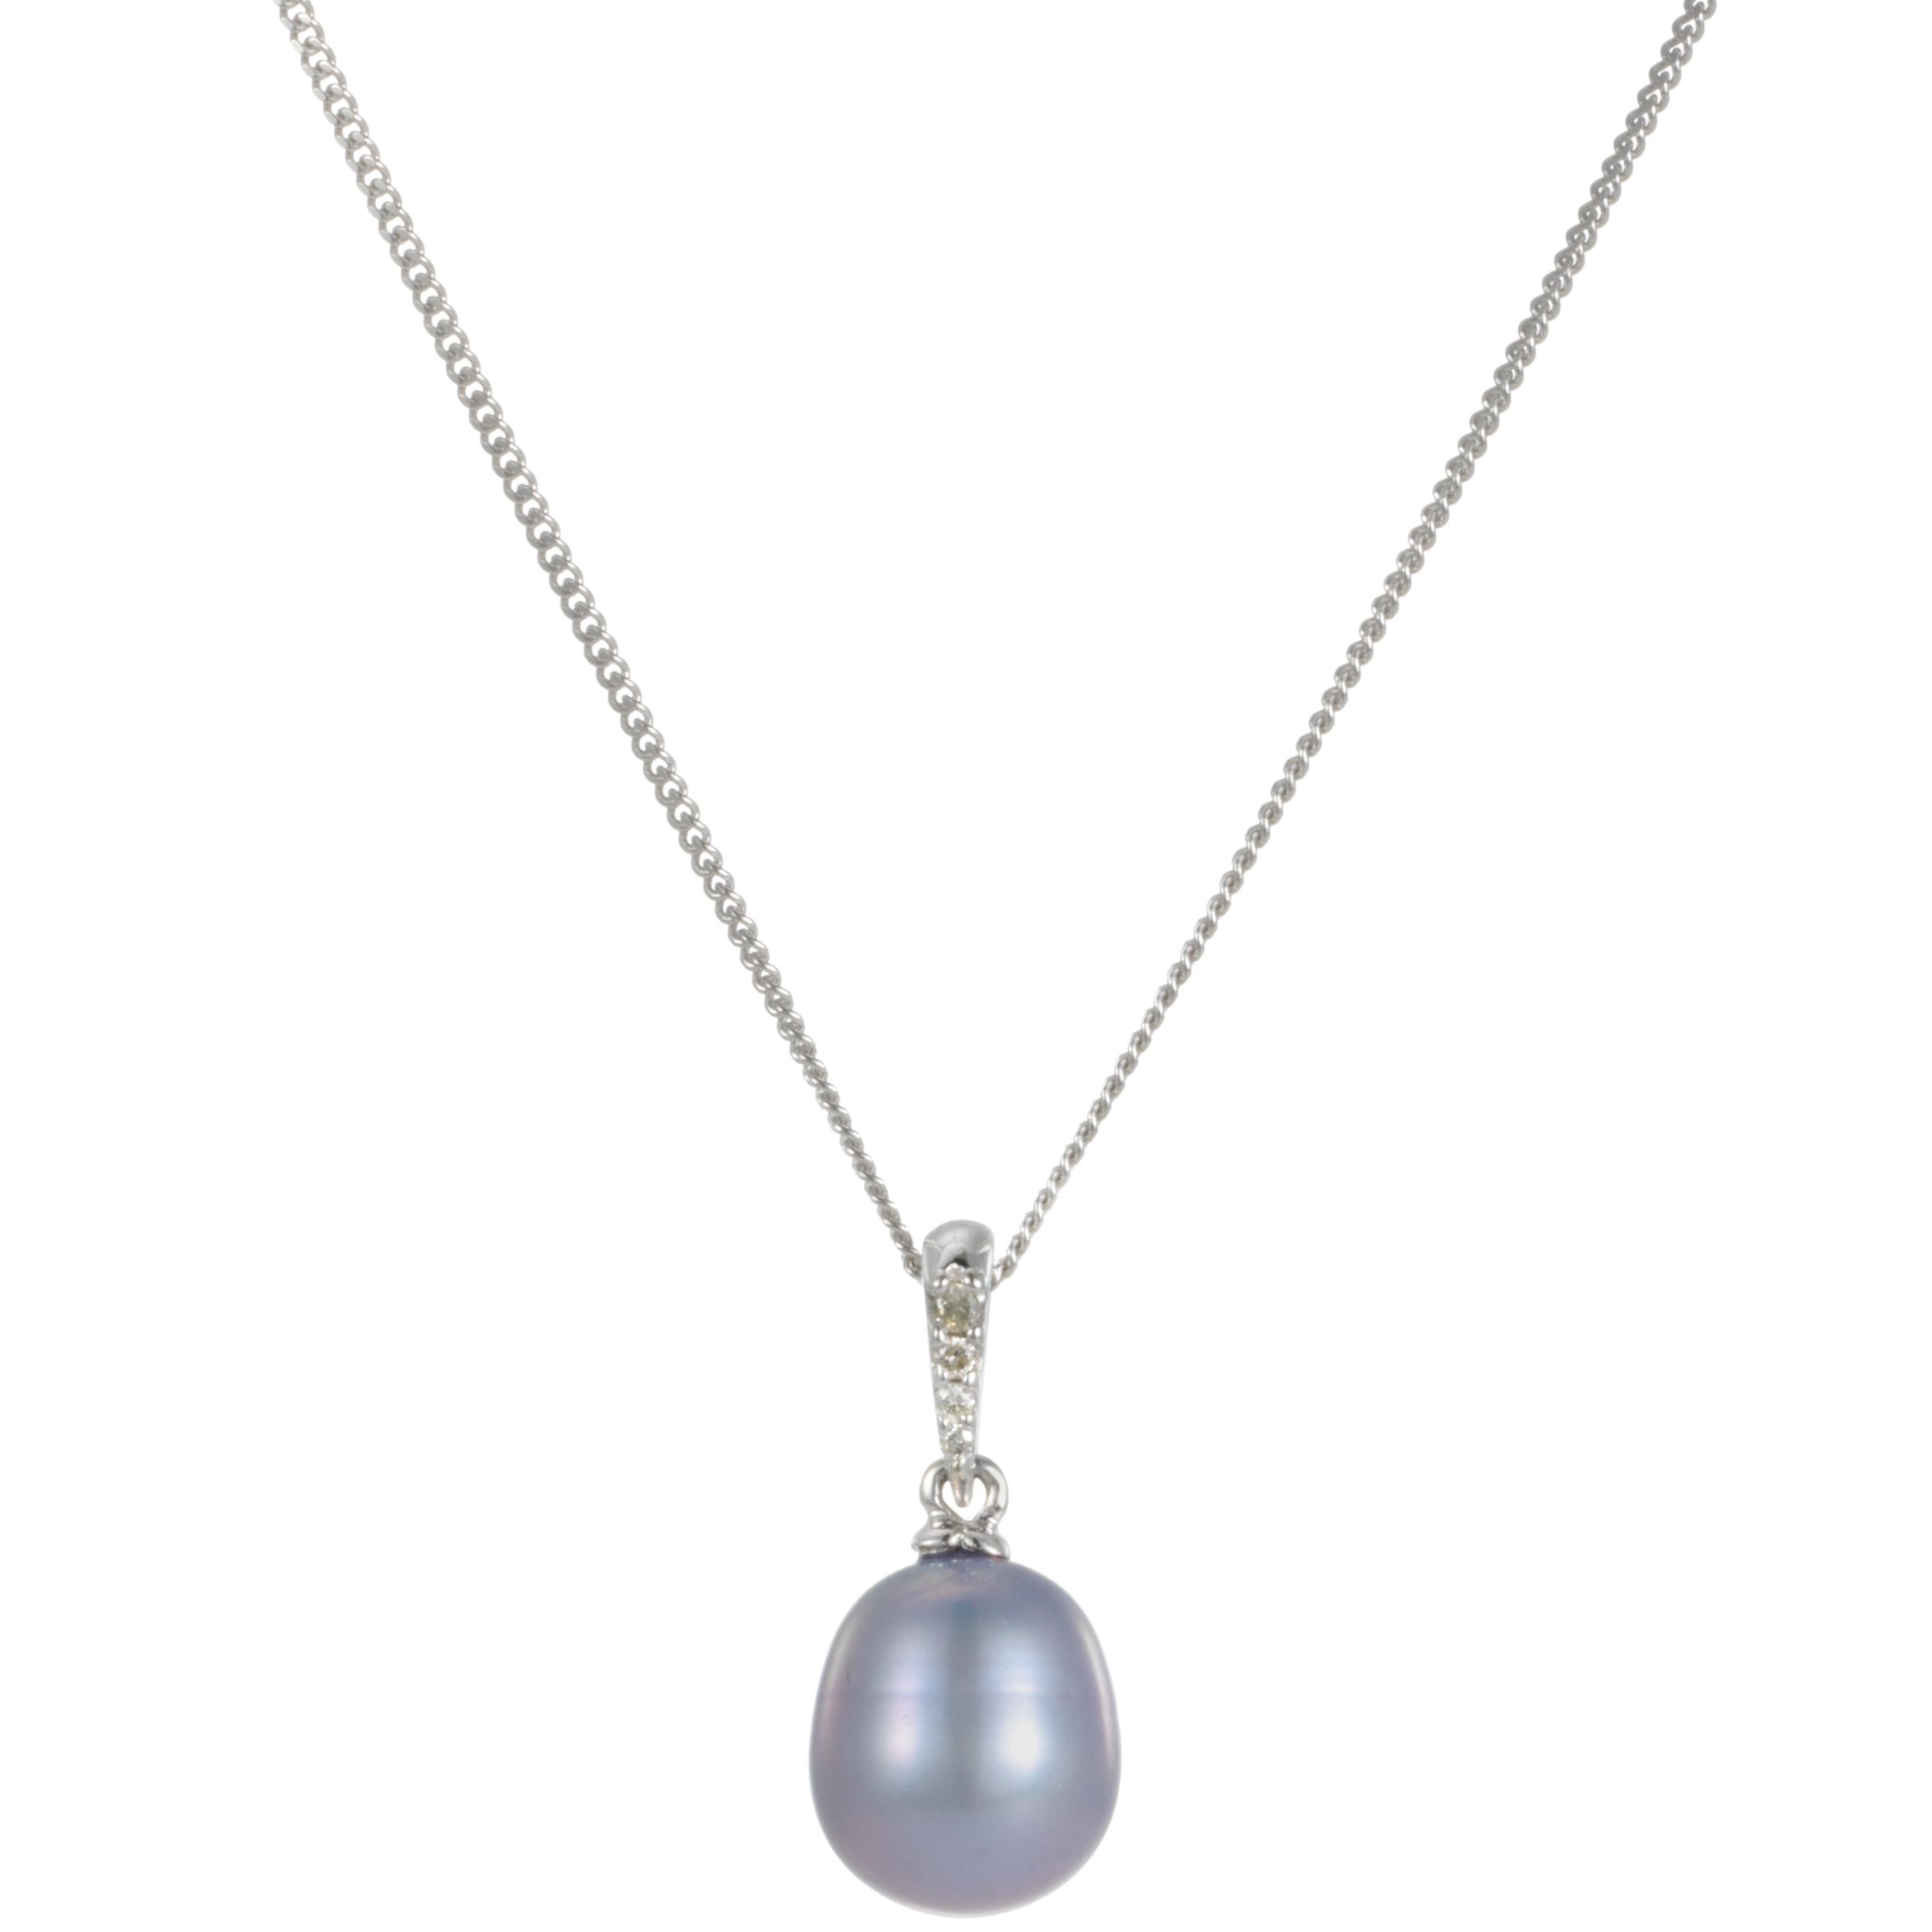 Davis 9ct White Gold Freshwater Pearl and Diamond Pendant Necklace ...